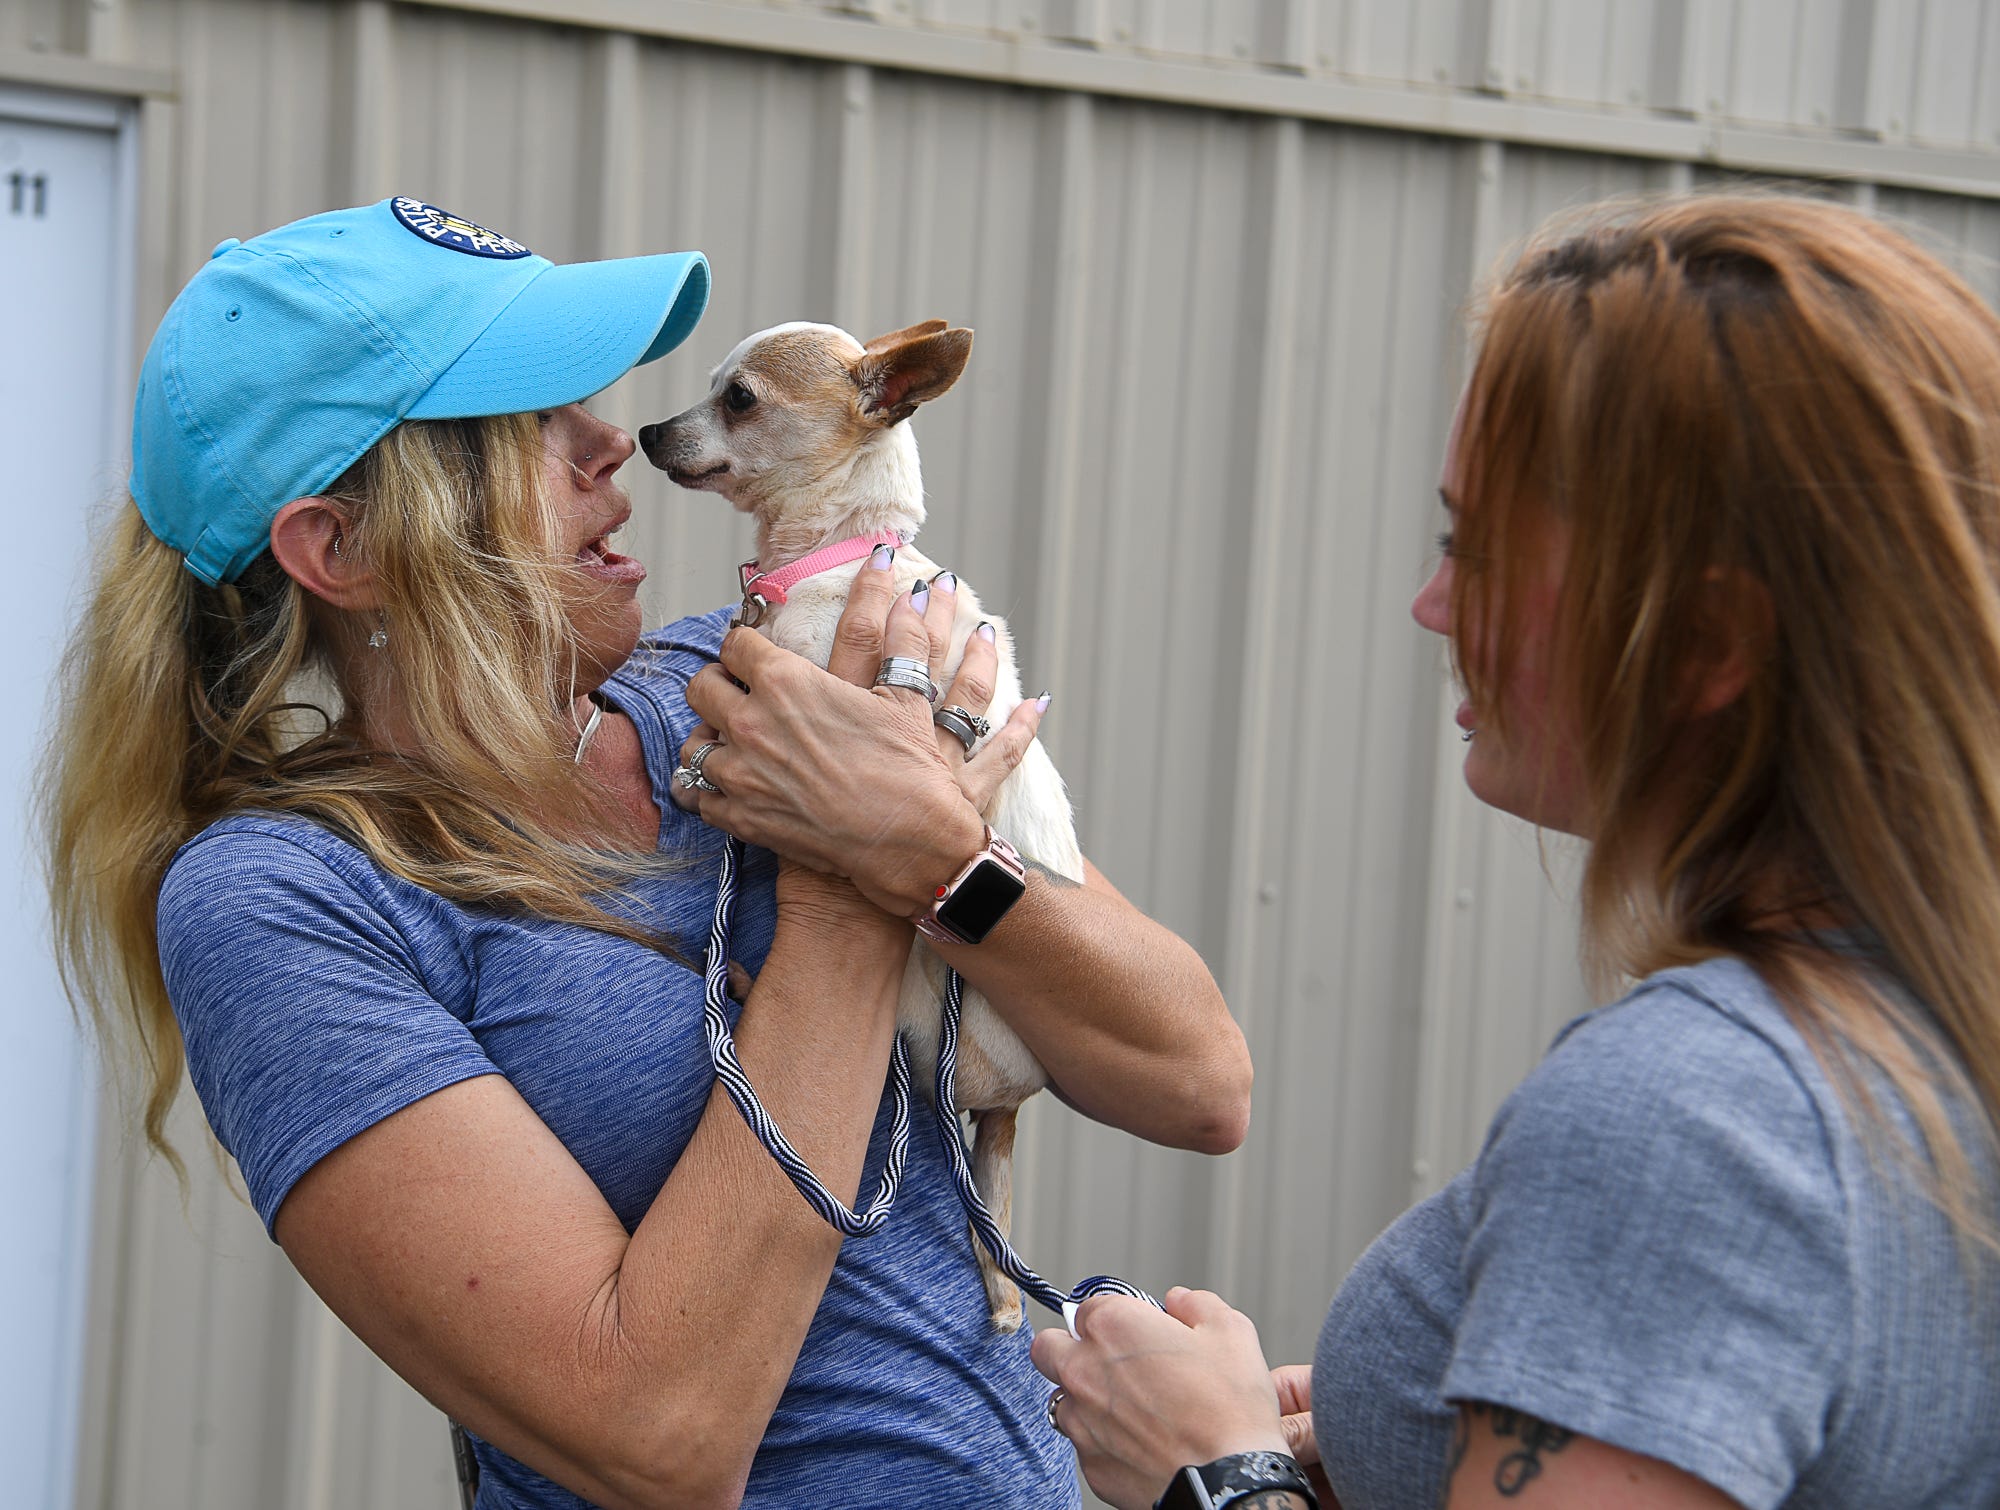 Ame Kessler, welcomes her daughter's dog Lucy home, Thursday, September 10, 2020. Alexis Regula was reunited with Lucy who she lost nine years ago while living in Tennessee, Thursday, September 10, 2020.
John A. Pavoncello photo